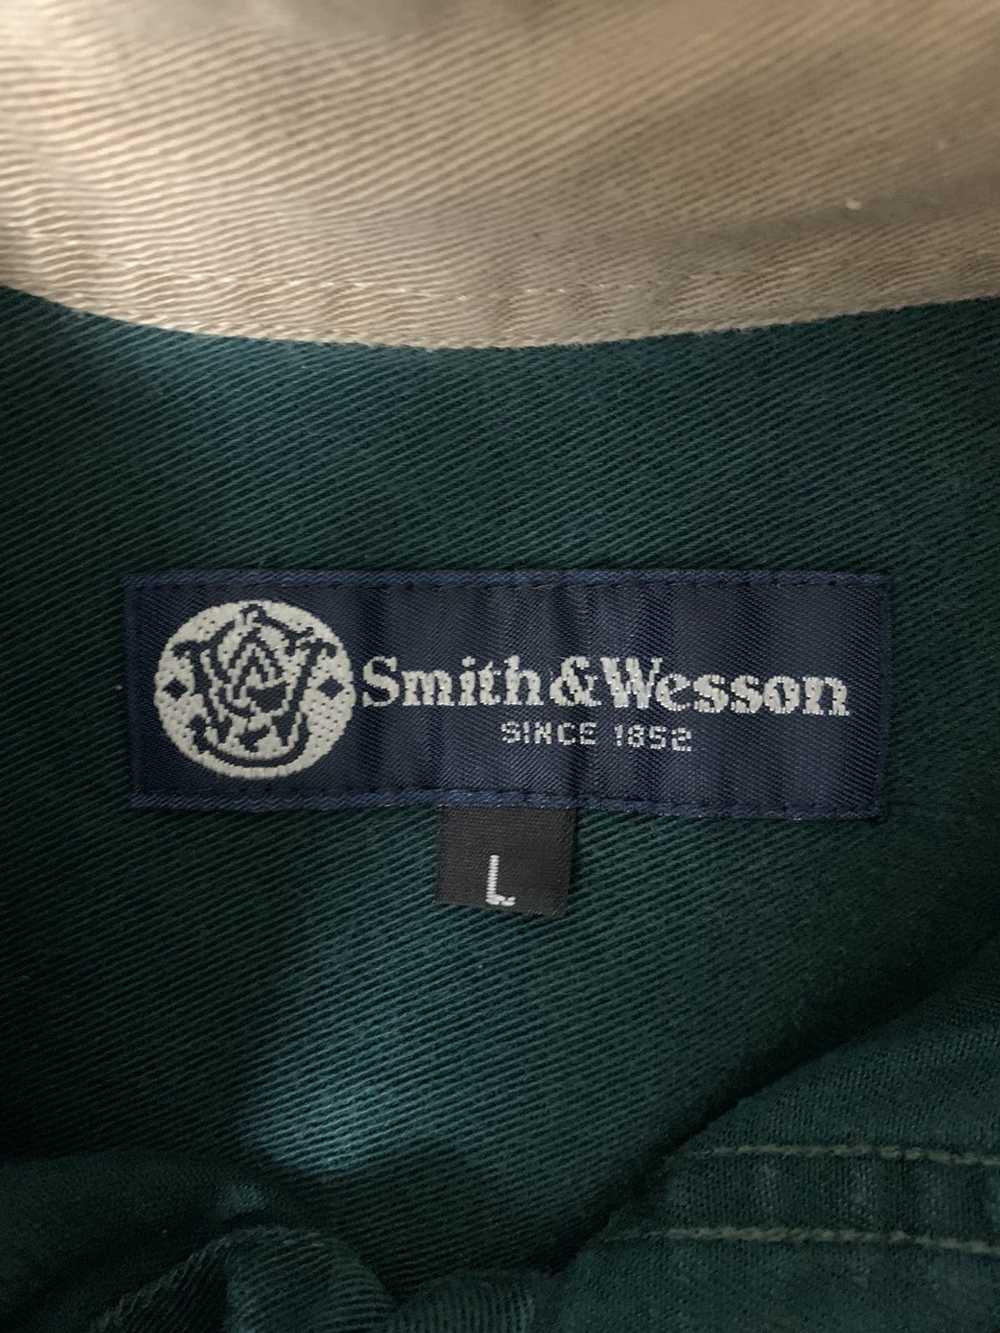 Vintage Vintage Smith & Wesson Button-Up - image 5